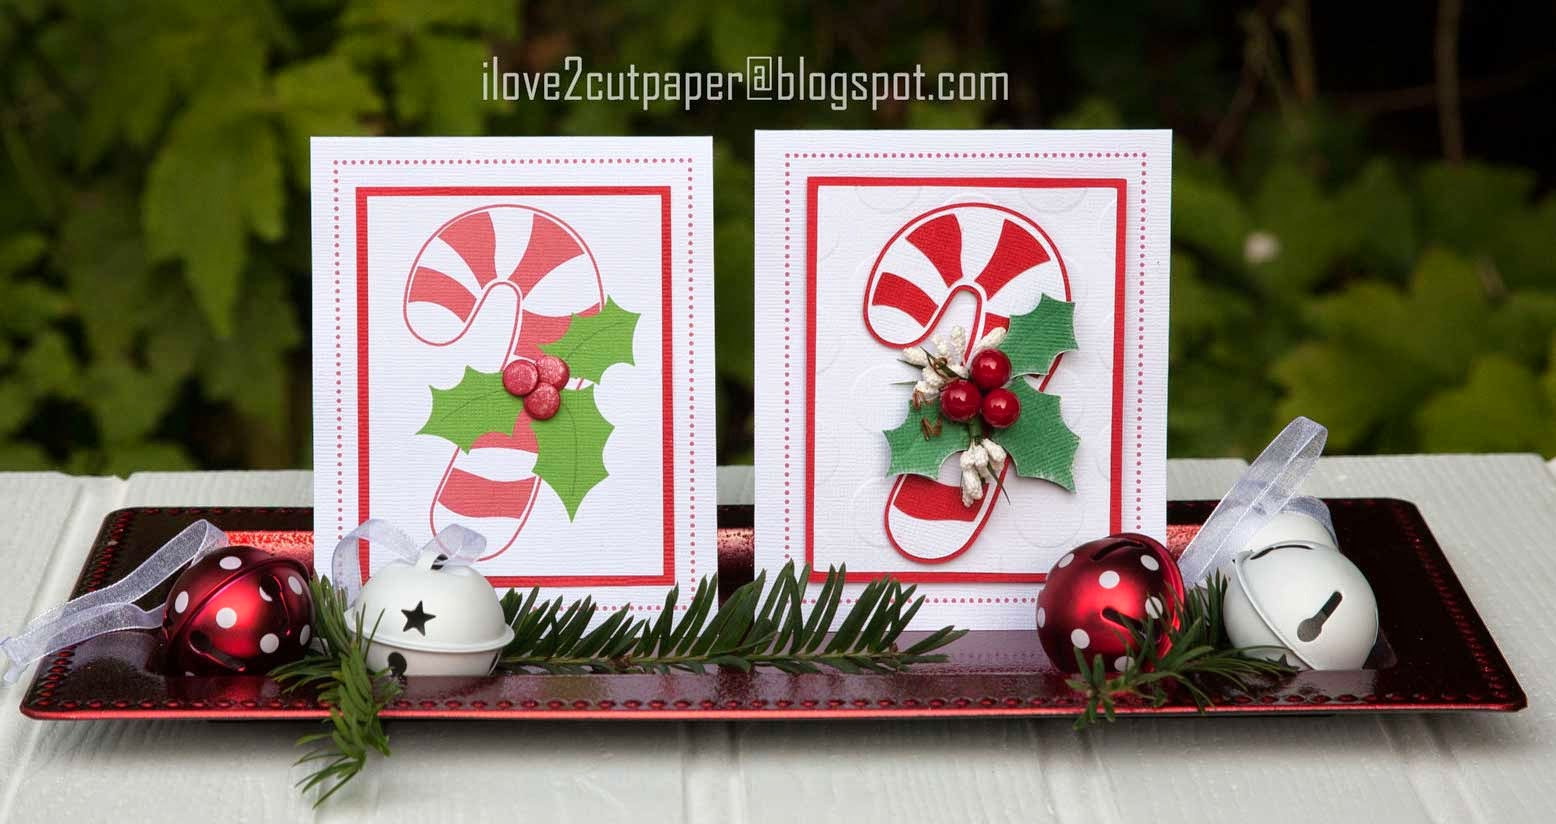 Candy Cane Christmas Cards
 i love 2 cut paper Candy Cane Christmas Cards